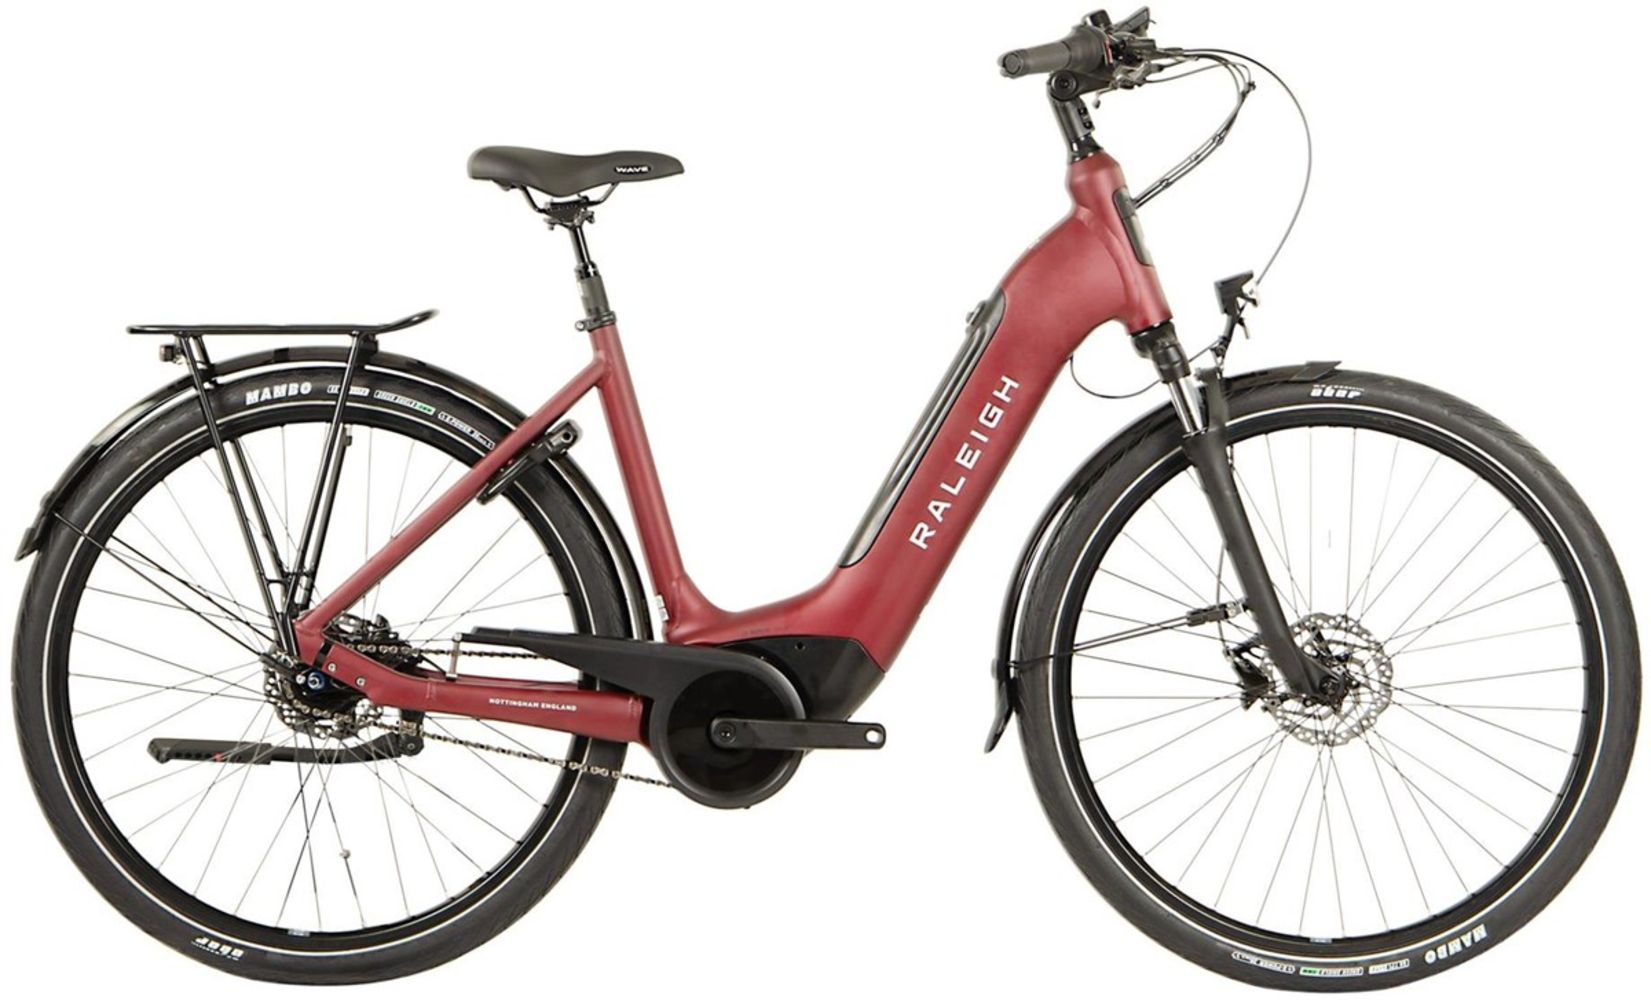 OVER £12000 OF BRAND NEW RALEIGH ELECTRIC BIKES ALL OVER 50% OFF THE RRP - VIEWING AVAILABLE - MAINLAND UK DELIVERY AVAILABLE